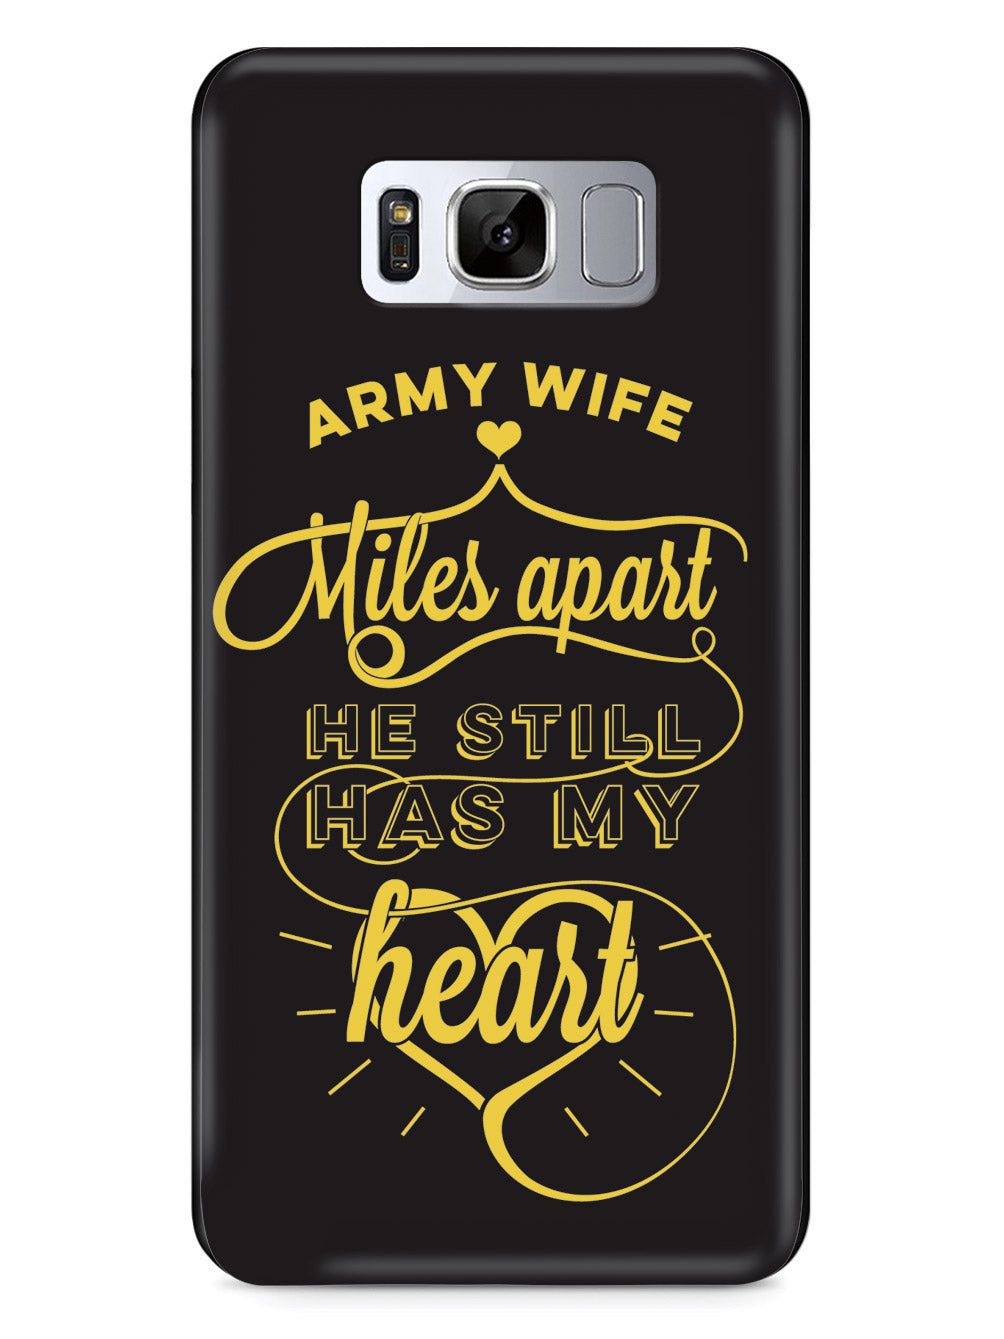 Army Wife - Miles Apart, Still Has My Heart Case